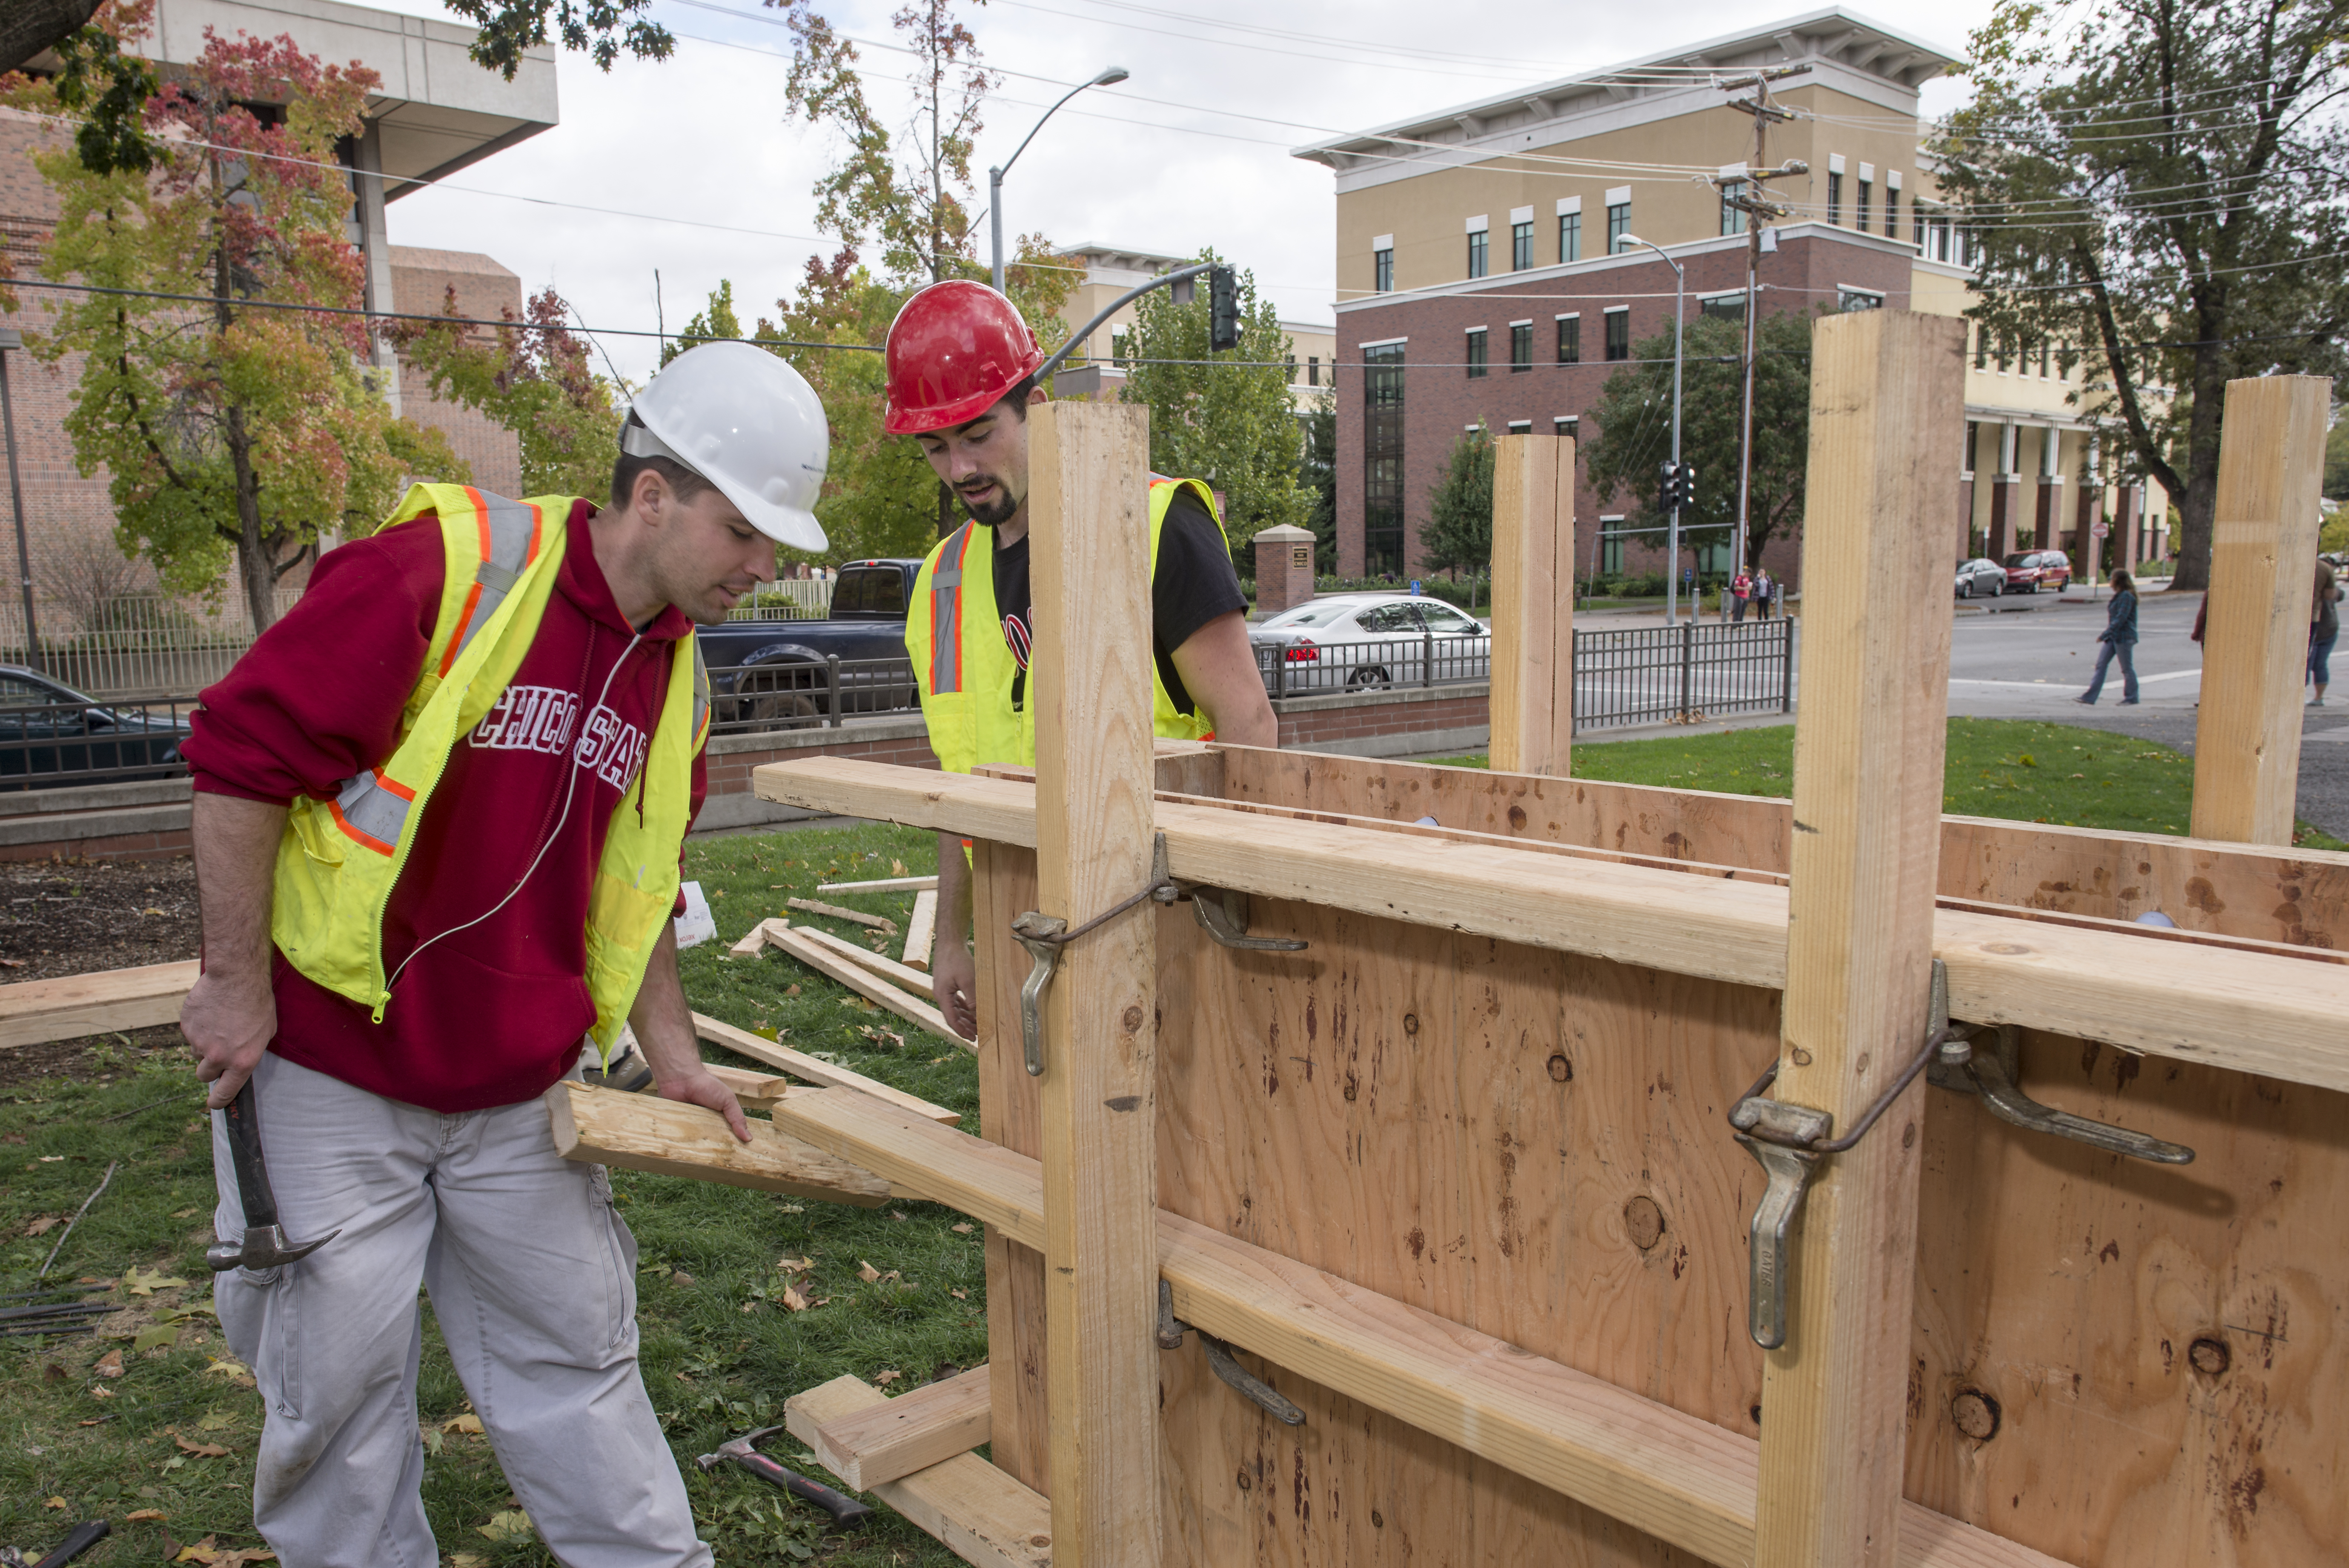 Grant Morgan (left) and Matt Hall (right) build concrete forms as part of a competition that was timed and measured for quality during a demonstration for more than 1,500 prospective students and their families visit the campus and engage directly with faculty, staff and current students at the 20th annual Chico Preview Day Saturday, October 25, 2014 in Chico, Calif. (Jason Halley/University Photographer)